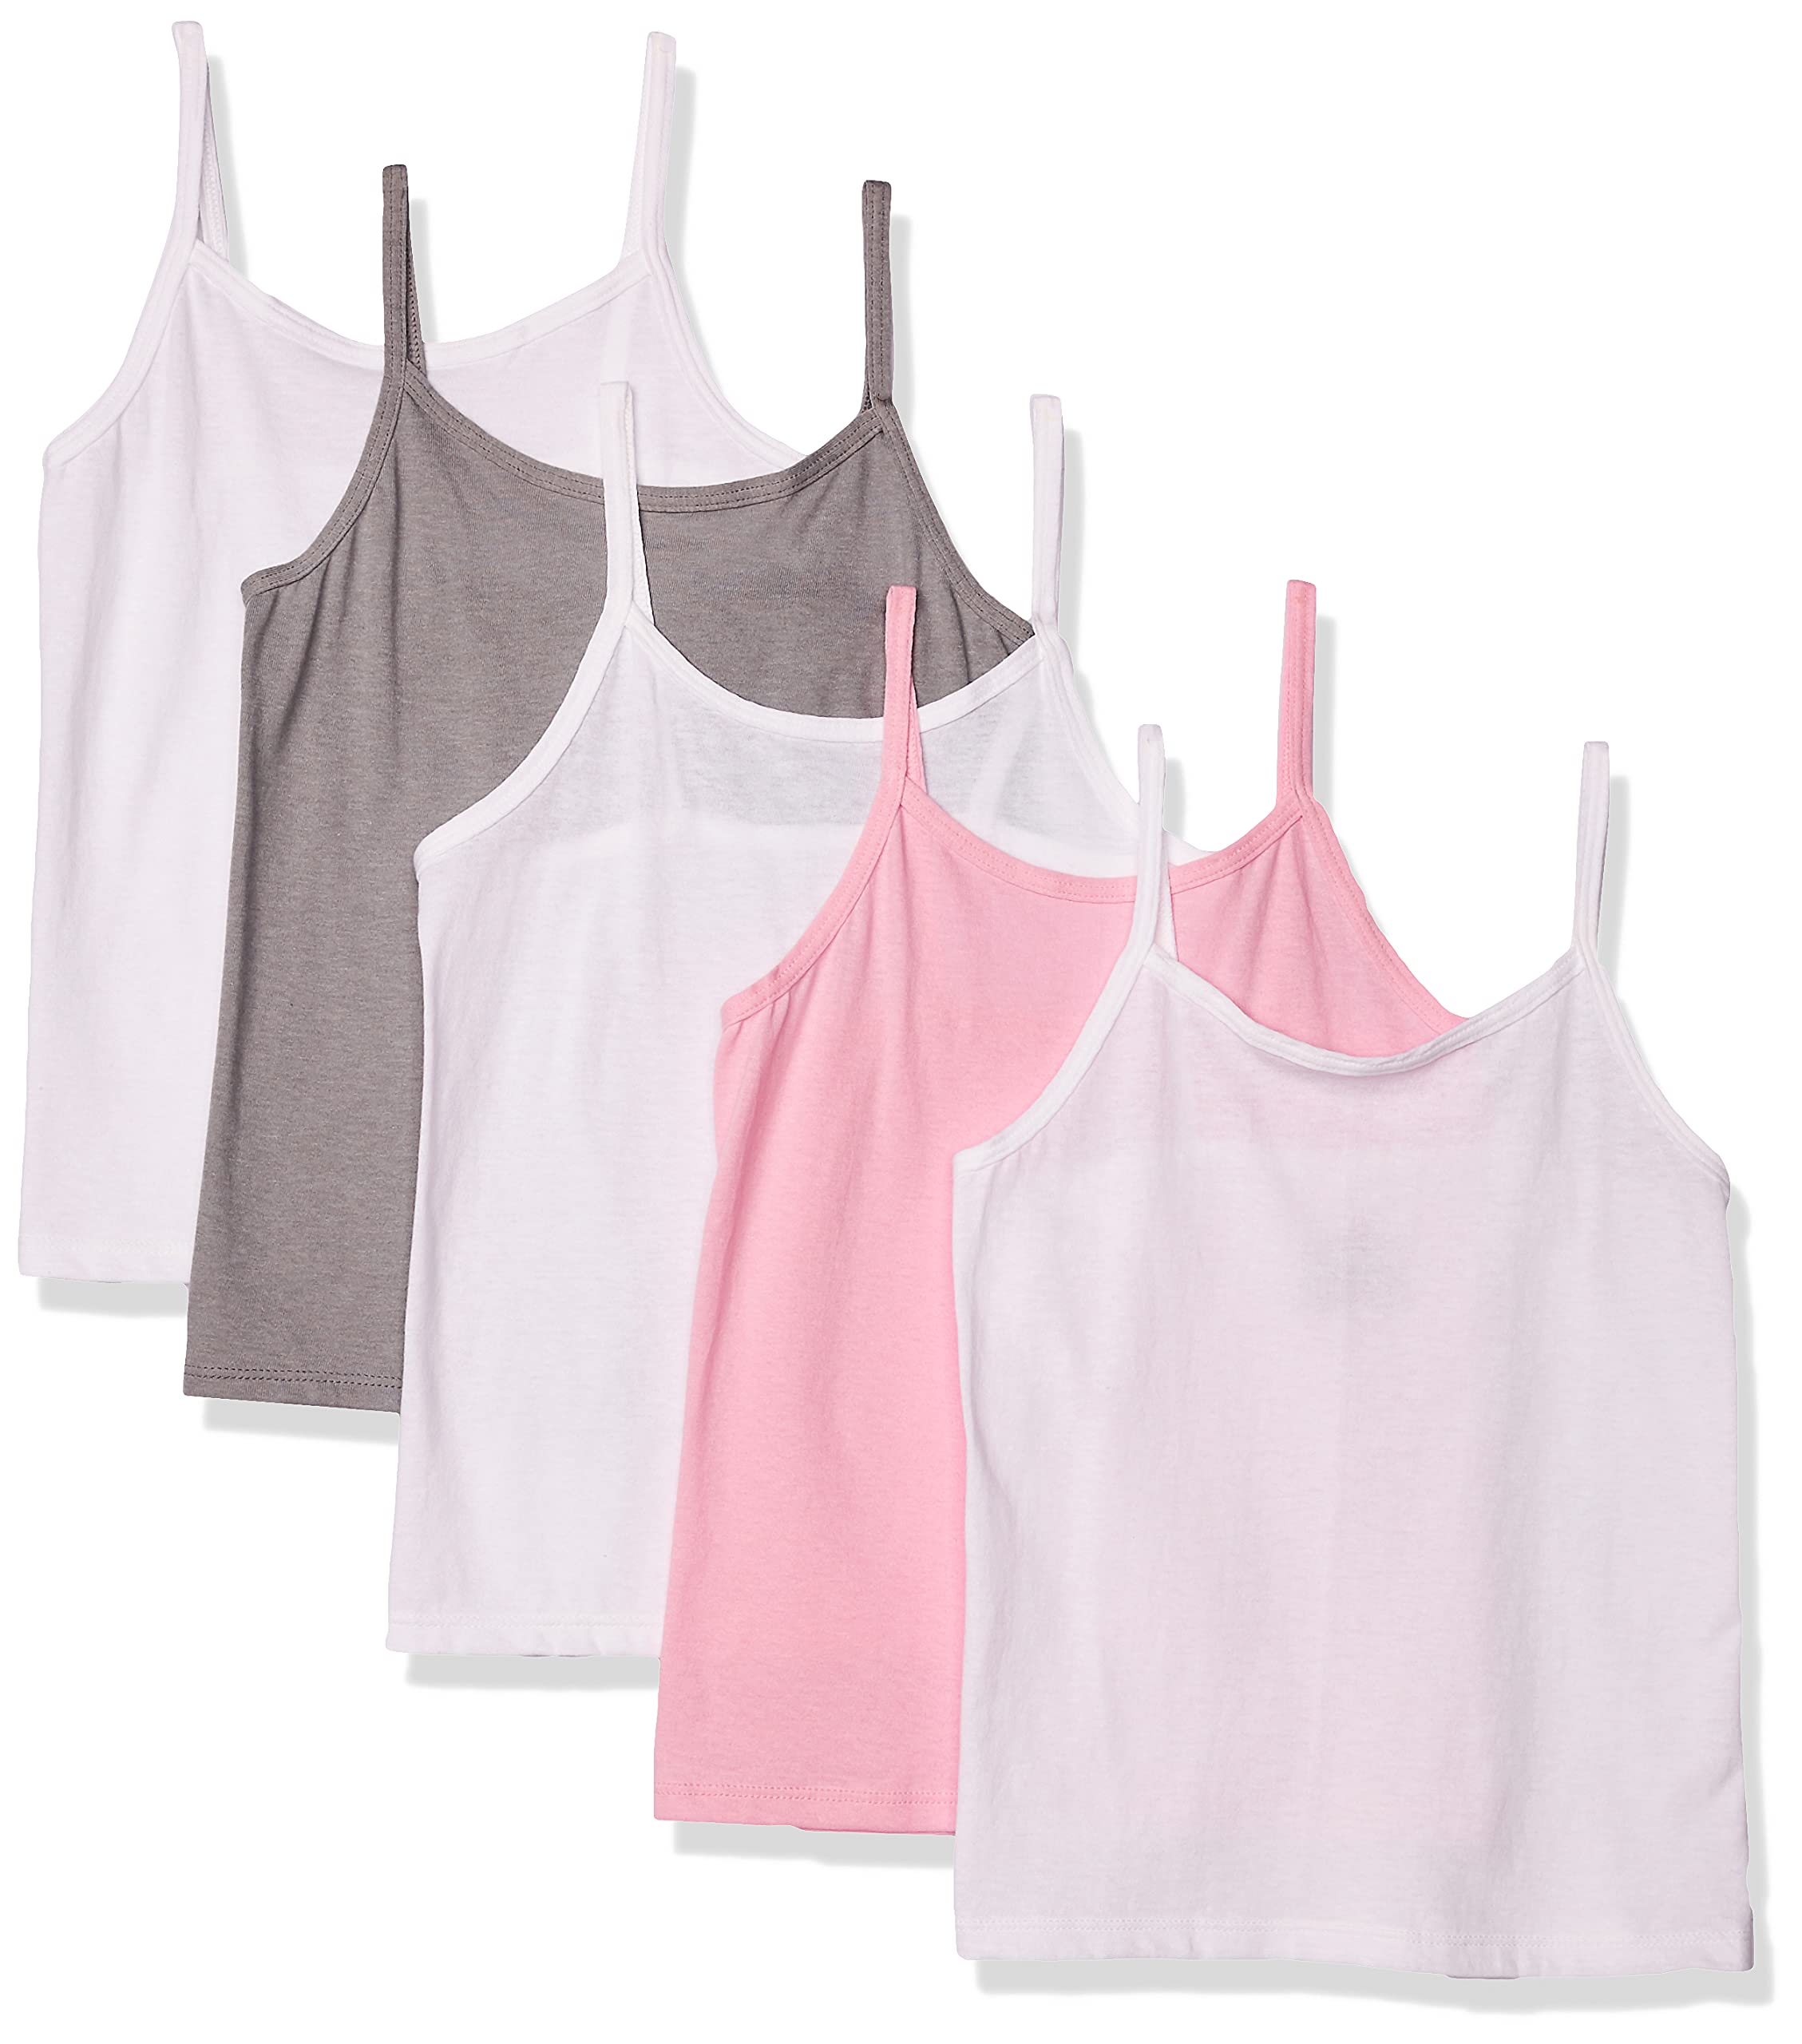 Hanes Girls’ Cami Tops, 100% Cotton Camisoles, Assorted Colors, Multipack